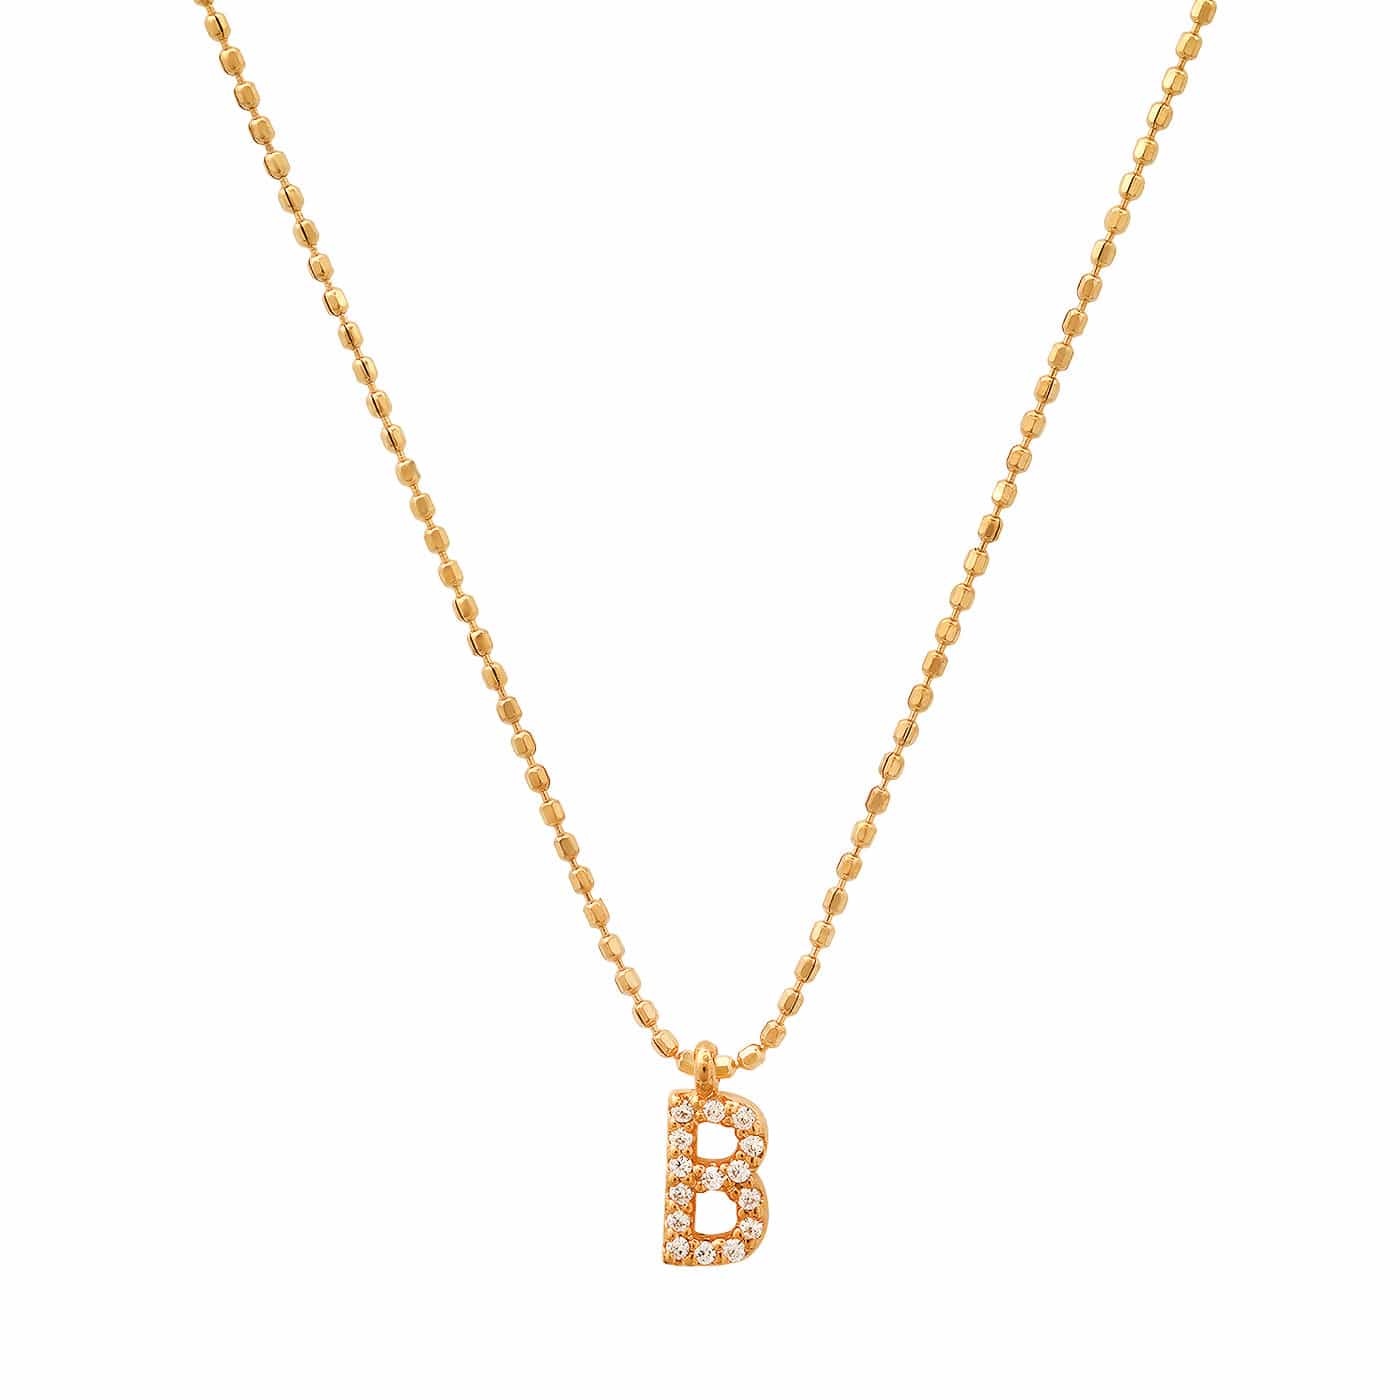 TAI JEWELRY Necklace B Pave Initial Ball Chain Necklace